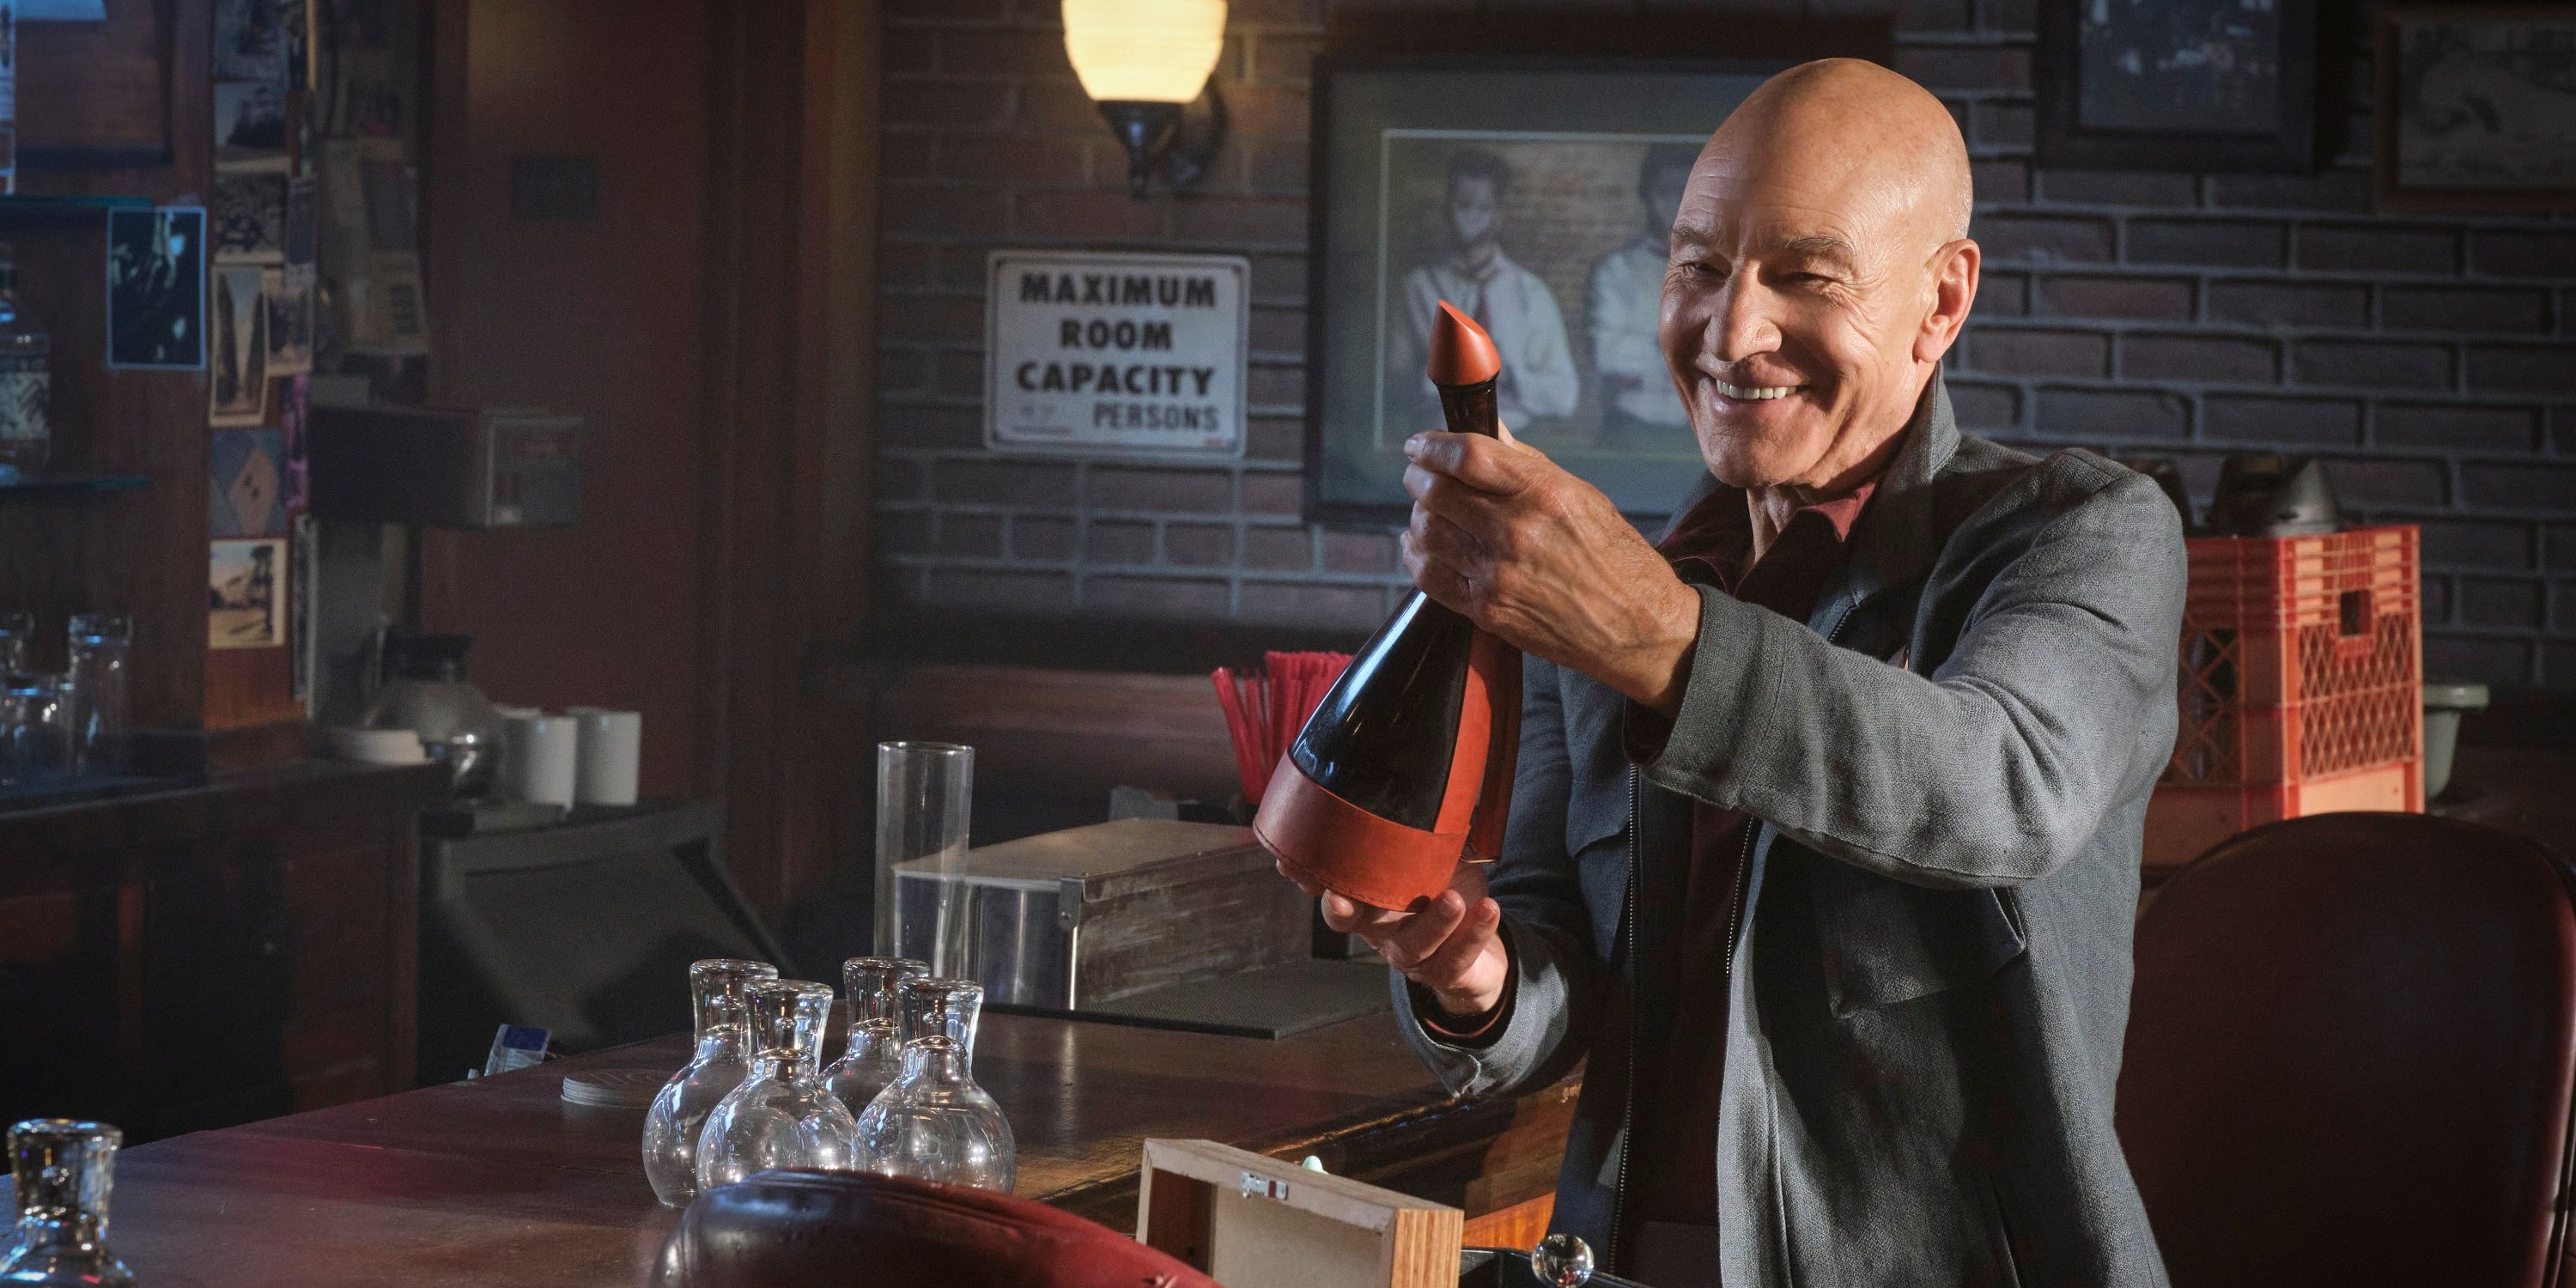 Jean-Luc holds up a bottle of space booze to young Guinan (off screen) in Star Trek Picard